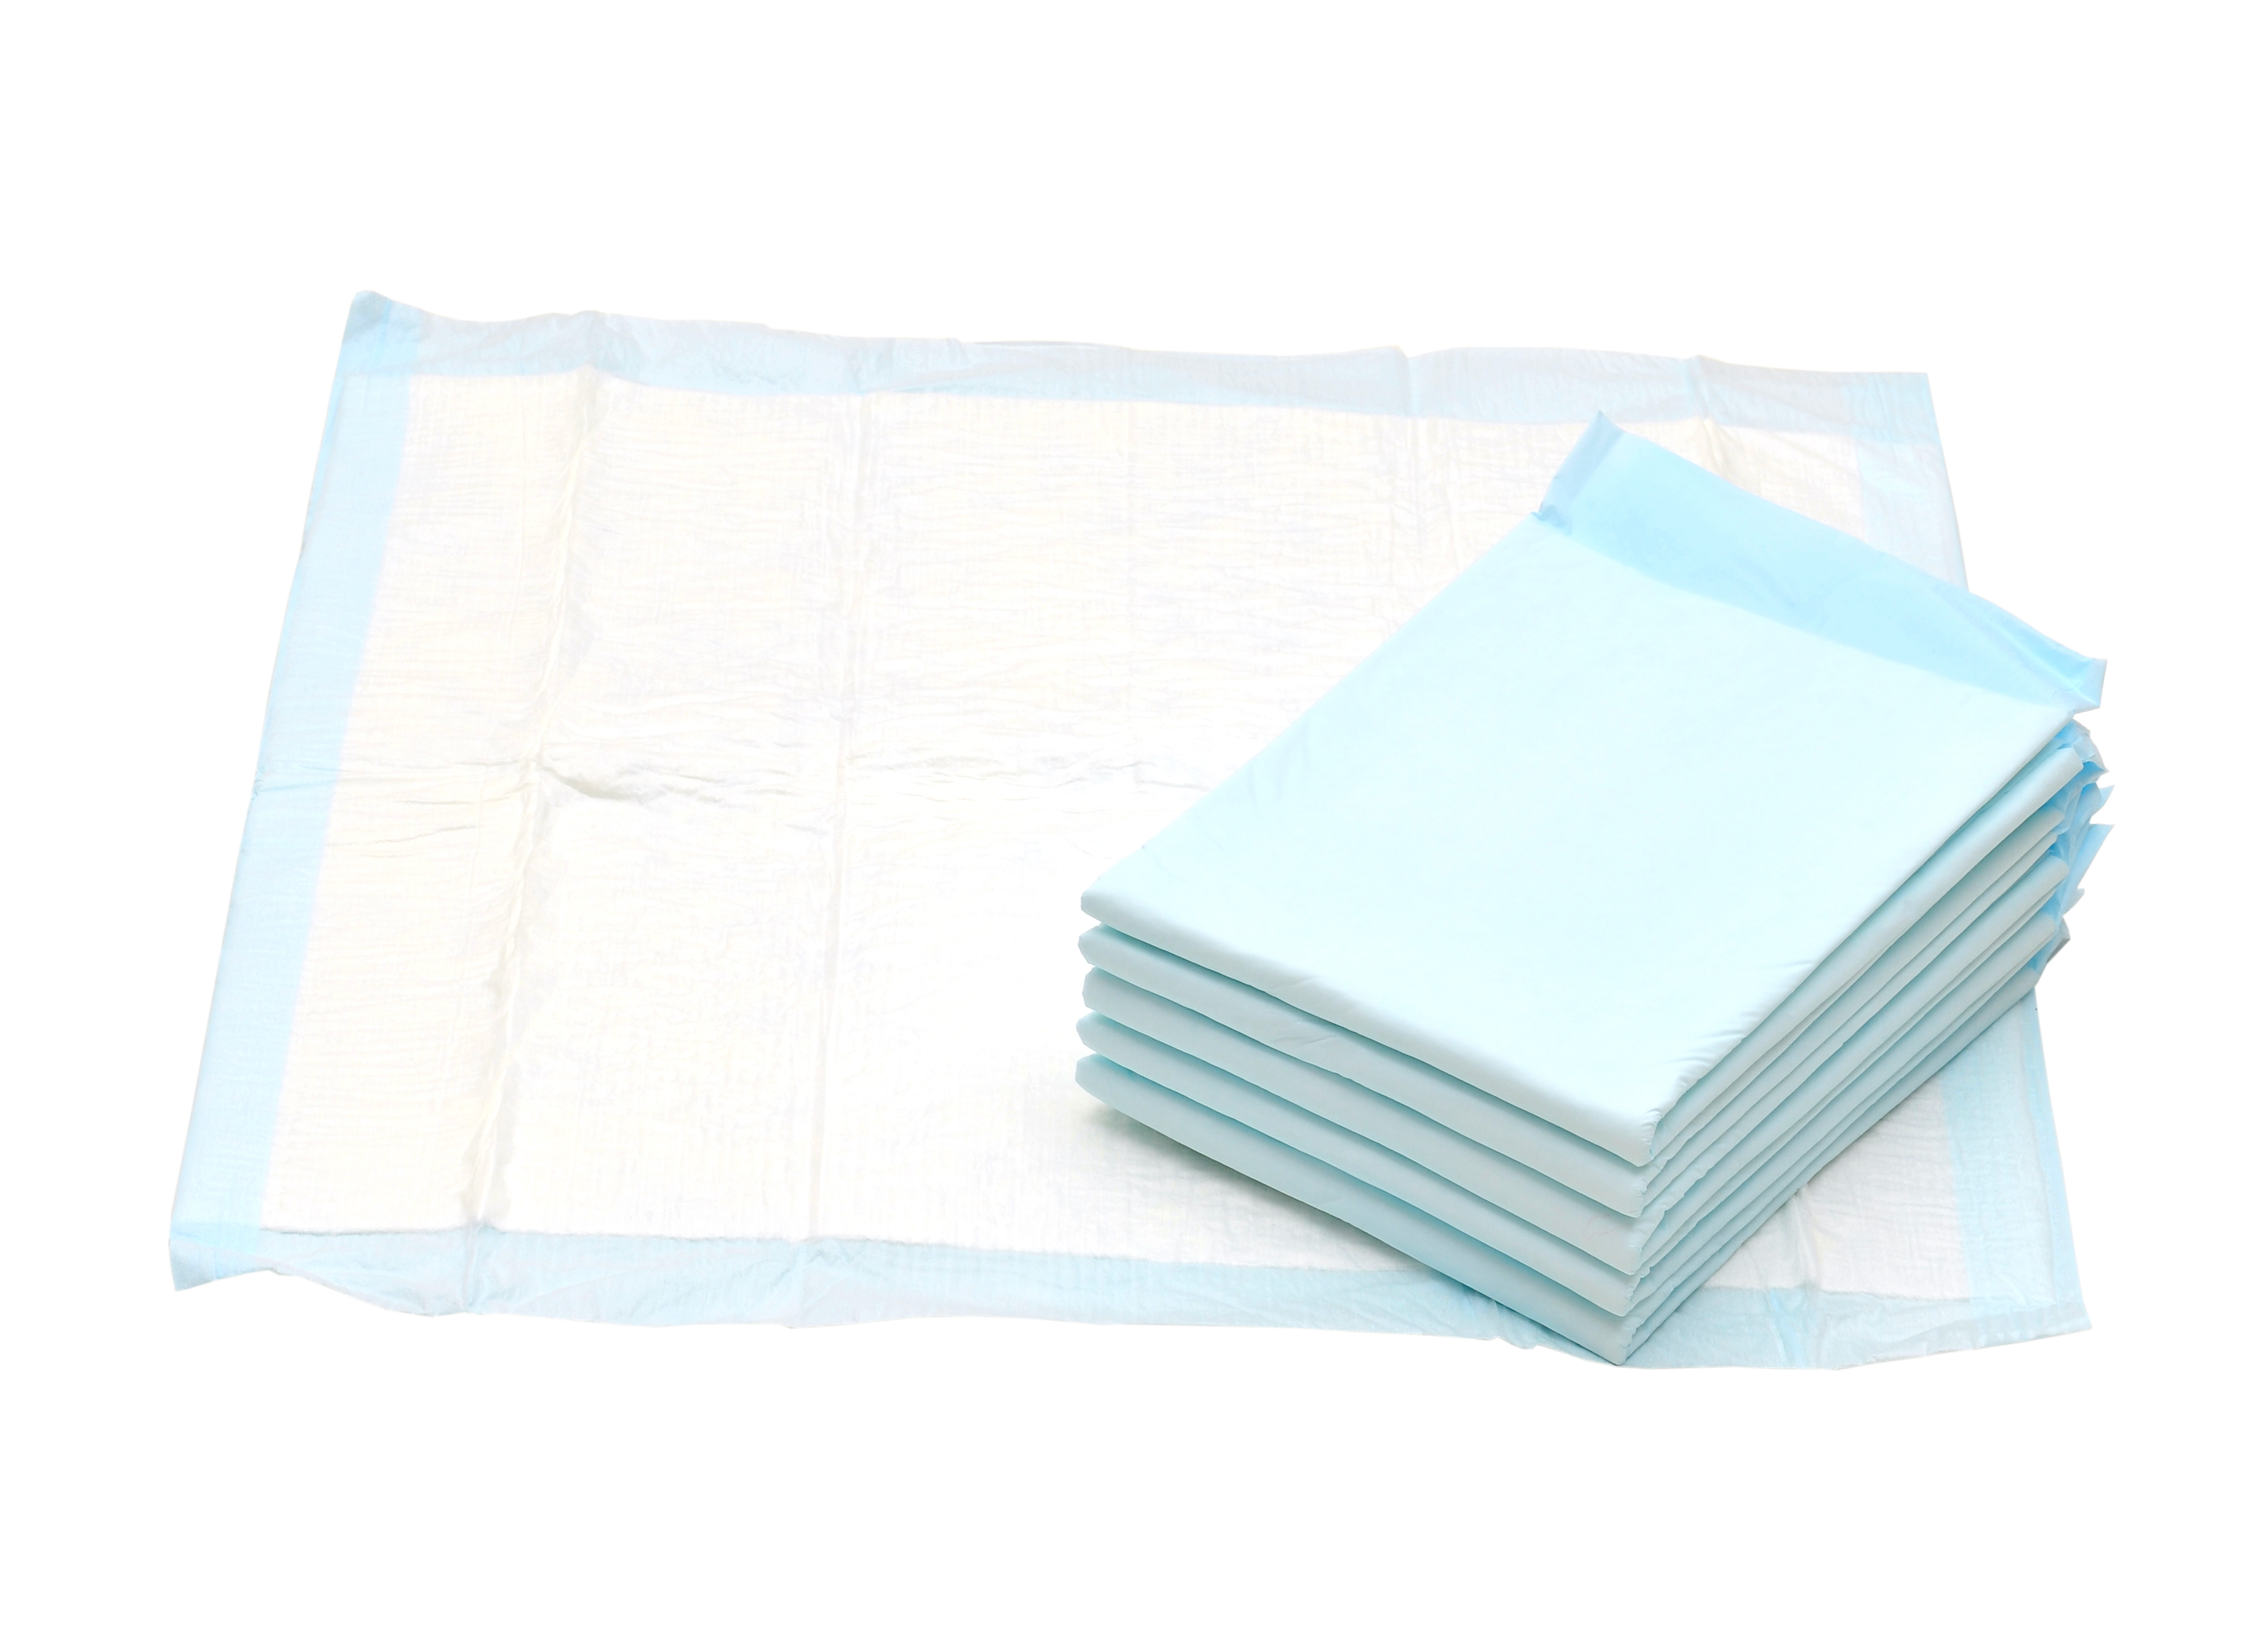 UP60X60 Romed underpads, 60x60cm, 10 pcs in a polybag, 20 x 10 pcs = 200 pcs in a carton.